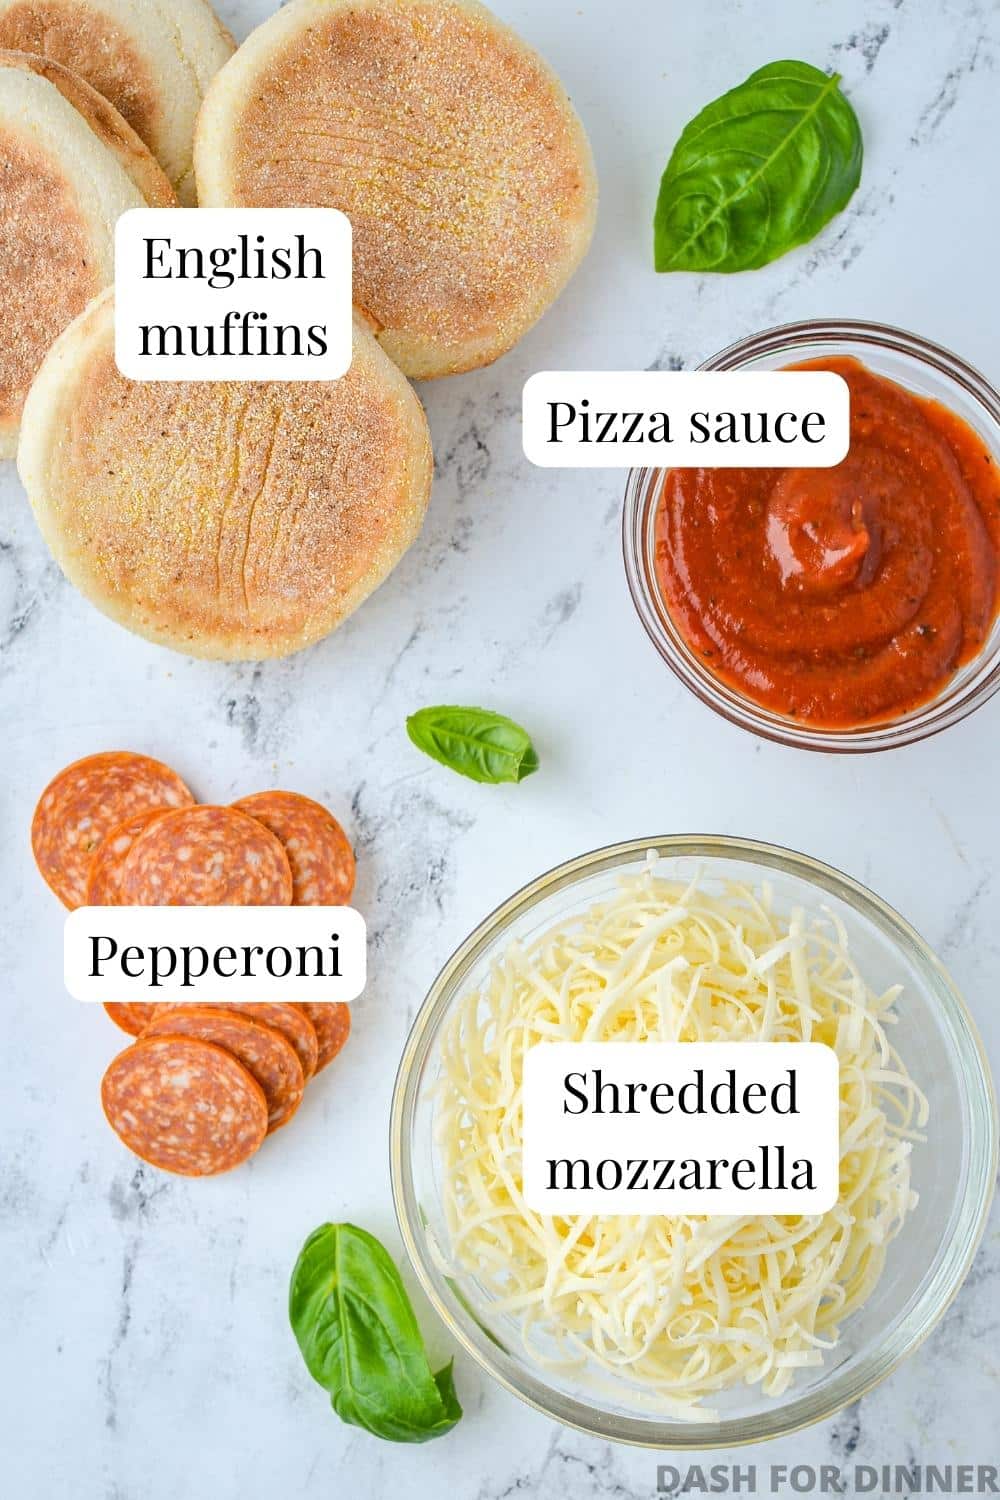 The ingredients needed to make English muffin pizzas, including sauce, pepperoni, and cheese.